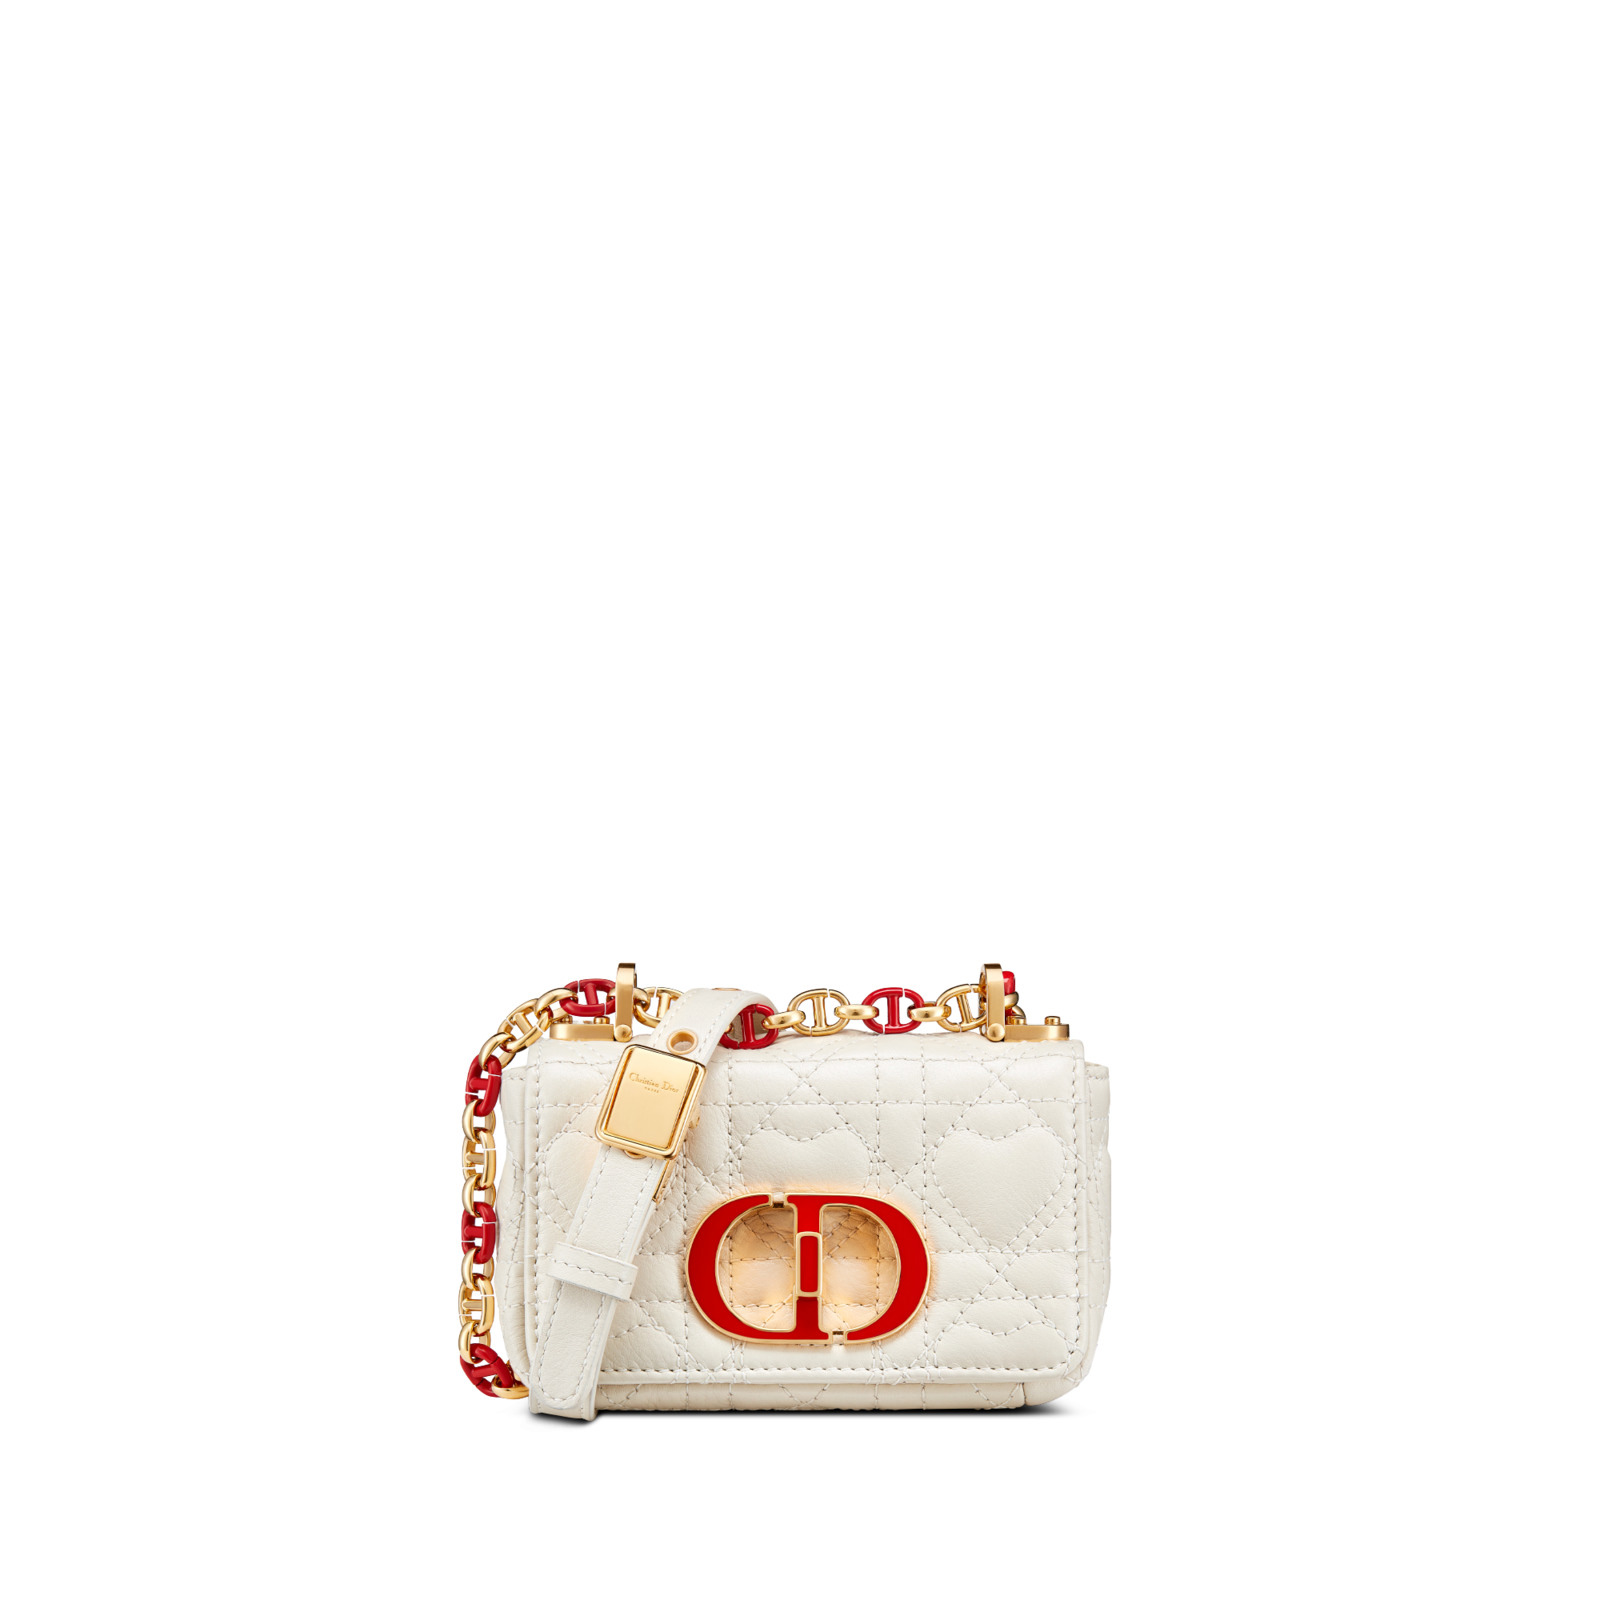 Dior presents a collection of Micro Bags that are miniature versions of  their most iconic designs